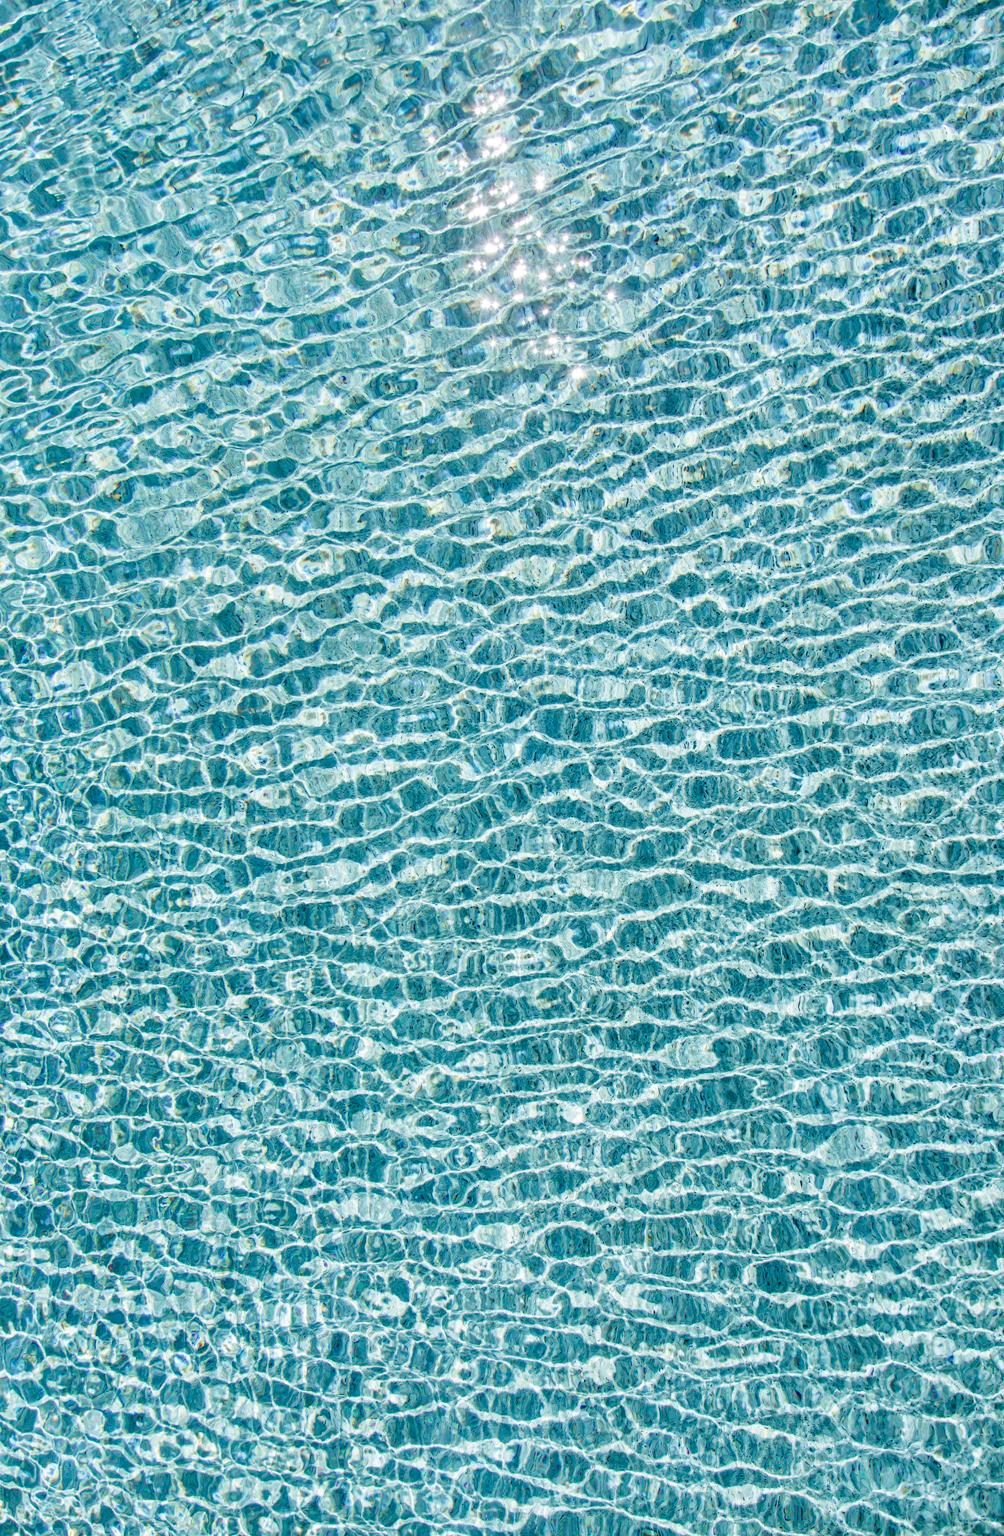 H2O V - large format photograph of sun reflections on pool water surface - Photograph by Erik Pawassar